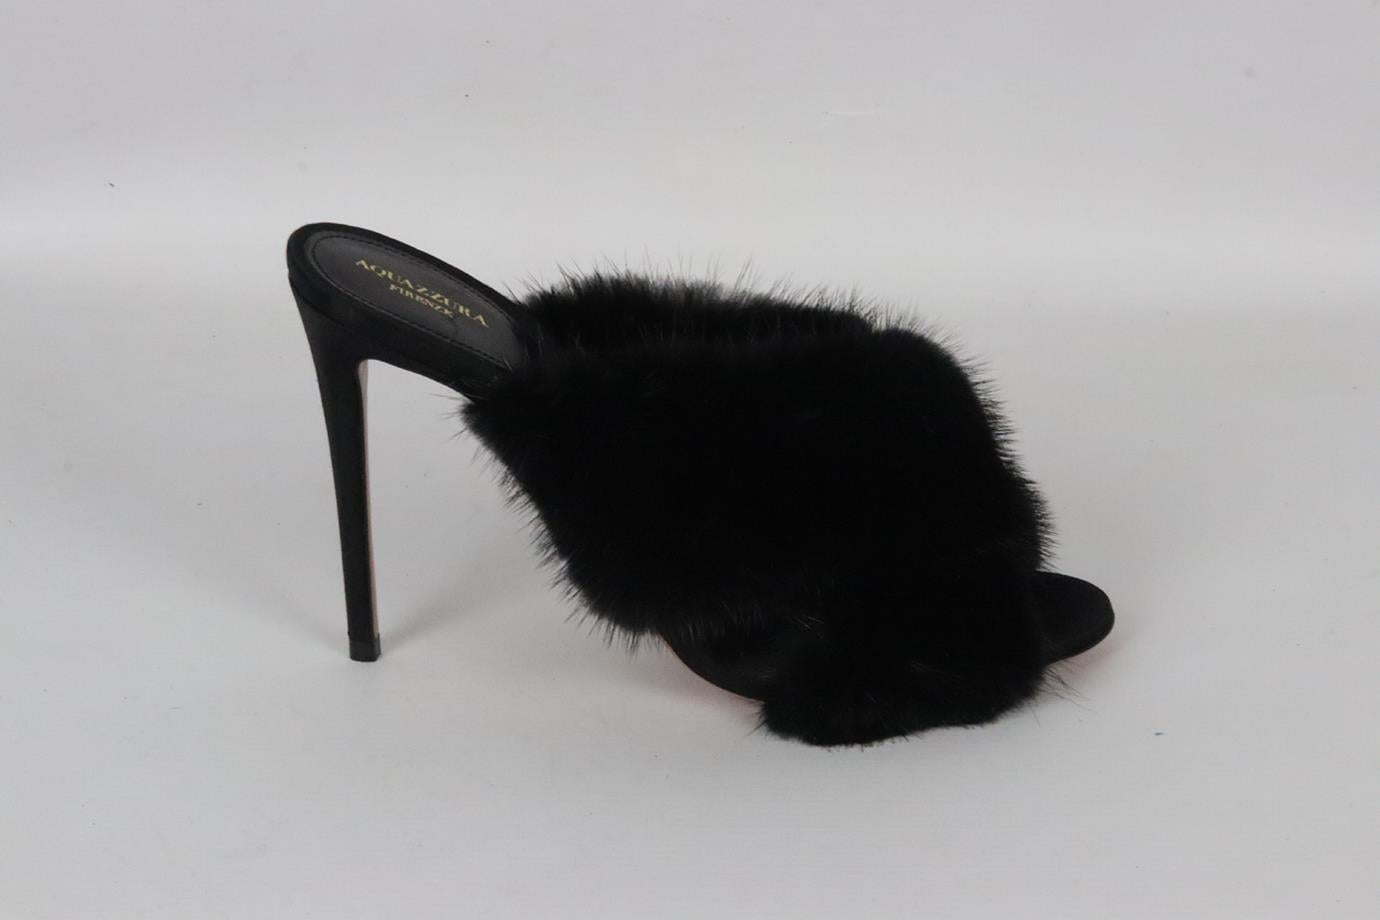 Aquazzura mink fur and satin mules. Black. Slip on. Does not come with dustbag or box. Size: EU 38.5 (UK 5.5, US 8.5). Insole: 9.5 in. Heel Height: 3.2 in. Platform: 0.2 in. New without box